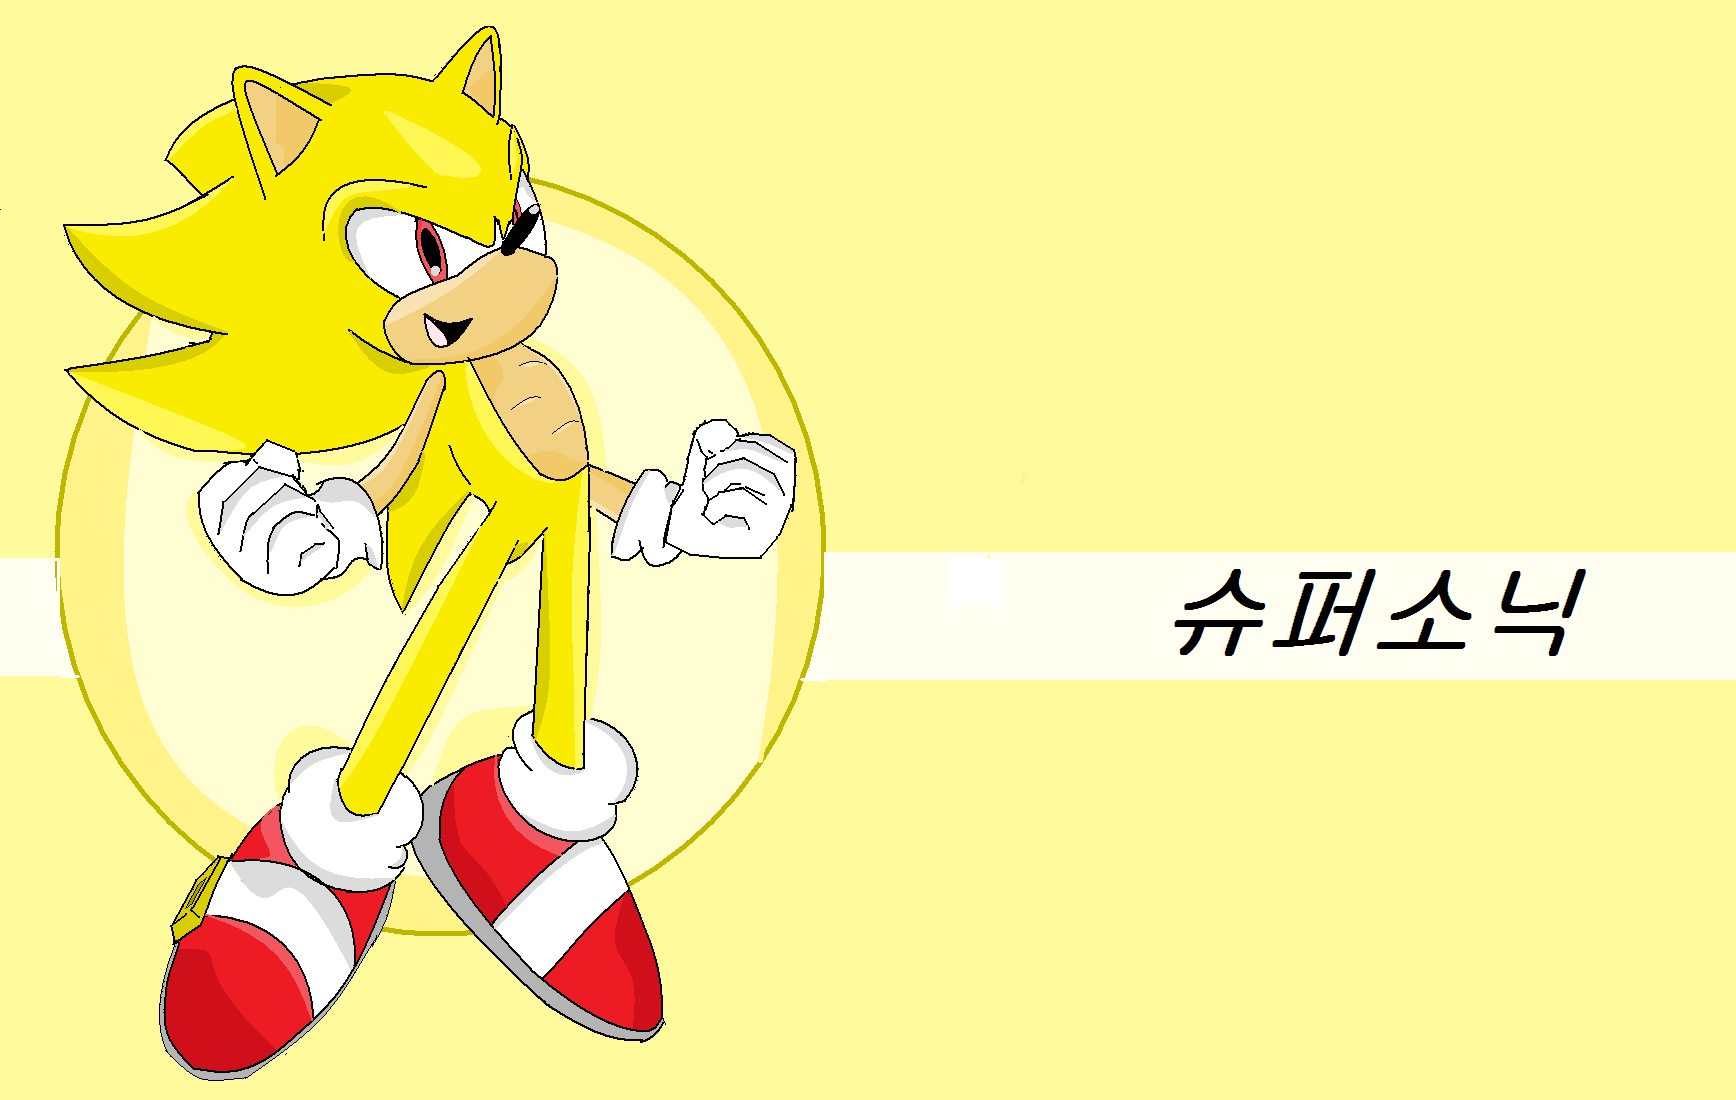 Sonic The Hedgehog, It's sucks that we never get to see hyper sonic ever  again because he's fan favorite form and sega always treats hyper sonic  like crap and even t